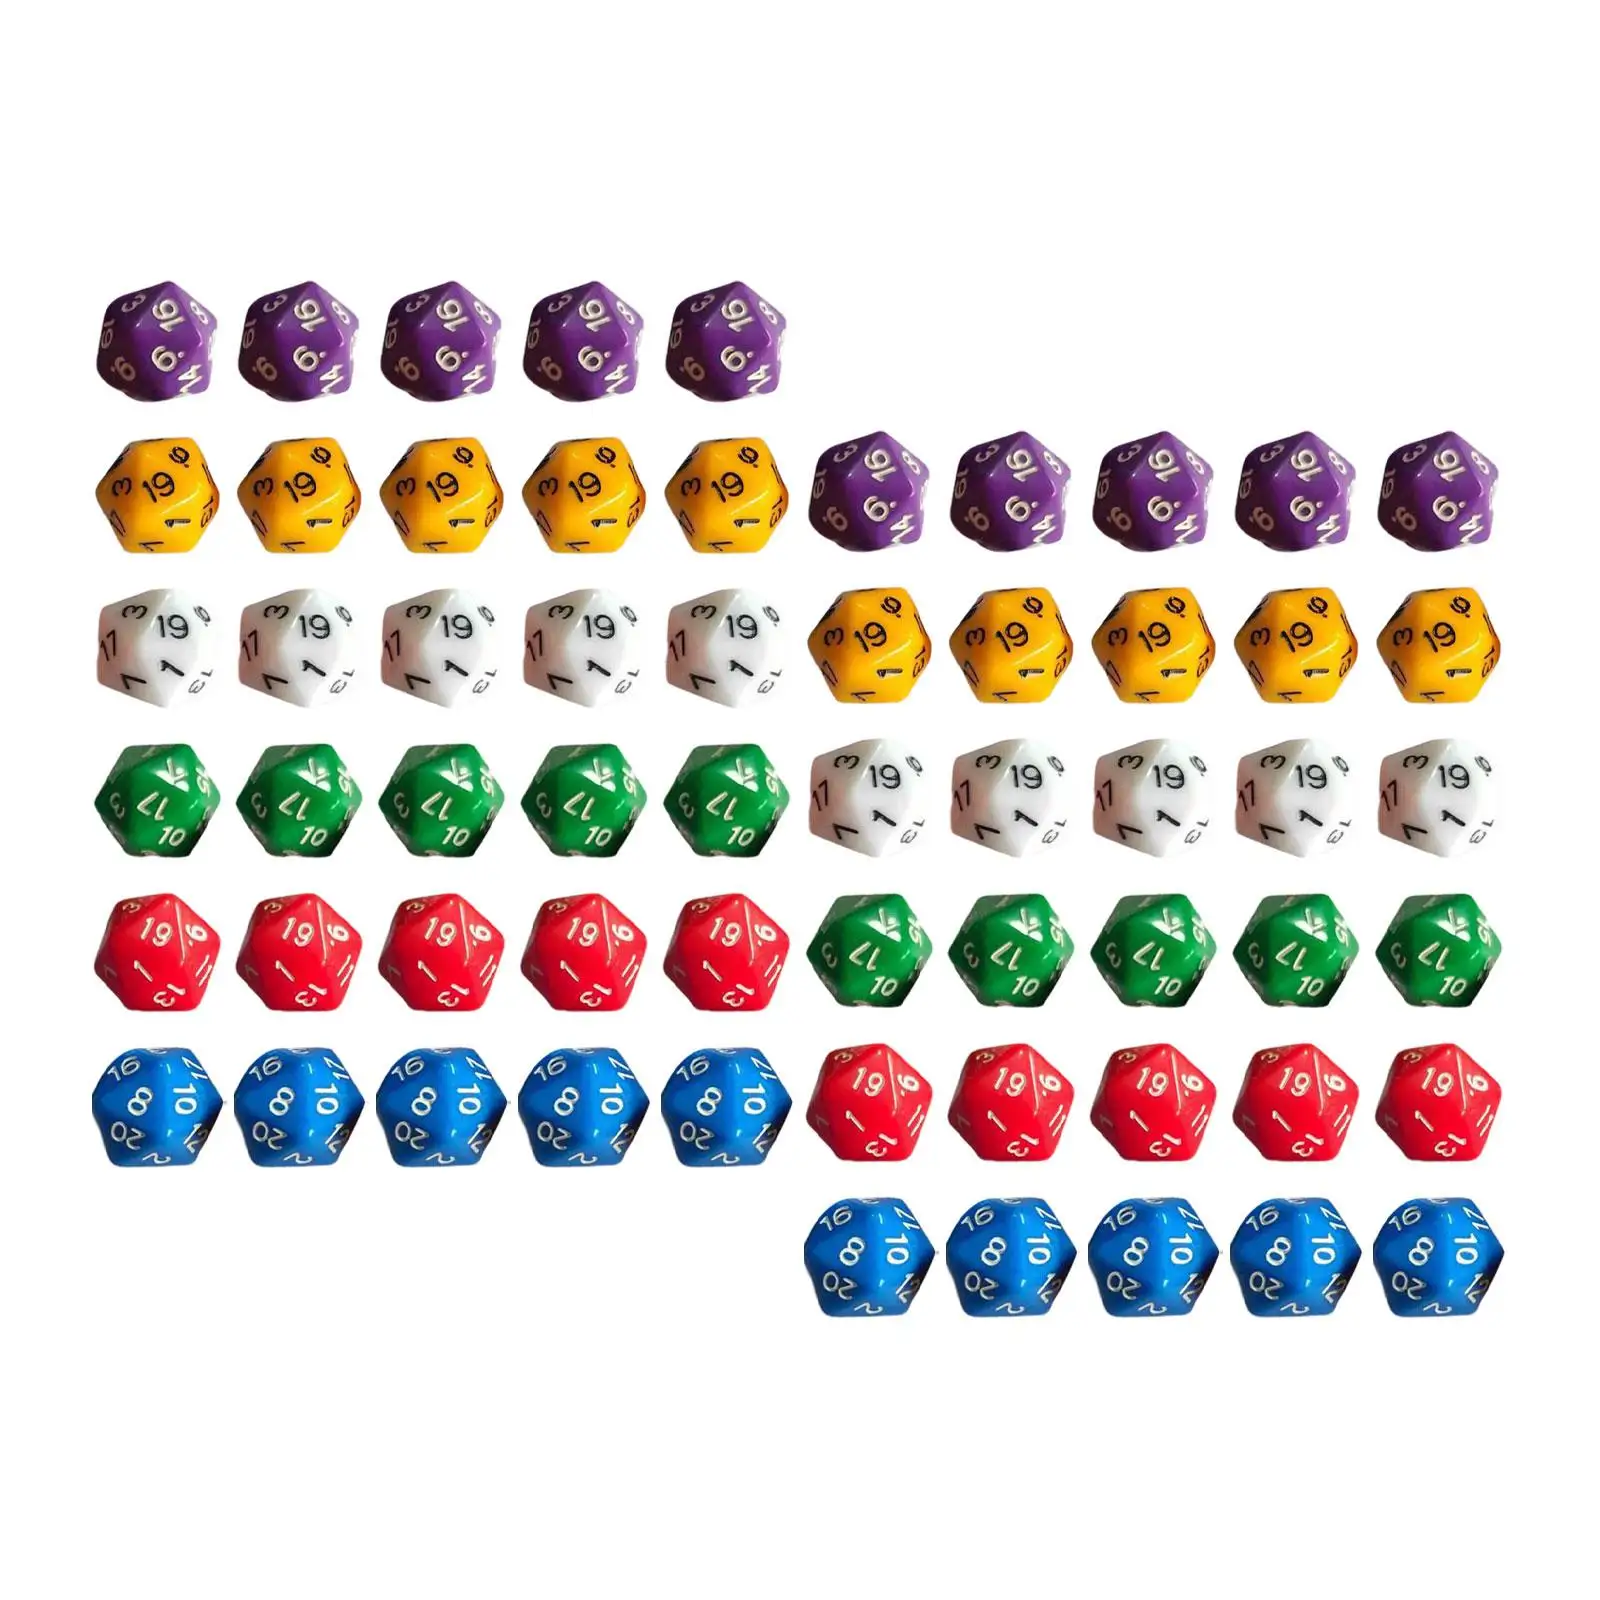 60 Pieces D20 Polyhedral Dice Acrylic Dice Dices, 20mm Multi Sided Dices for Board Game, Table Game,